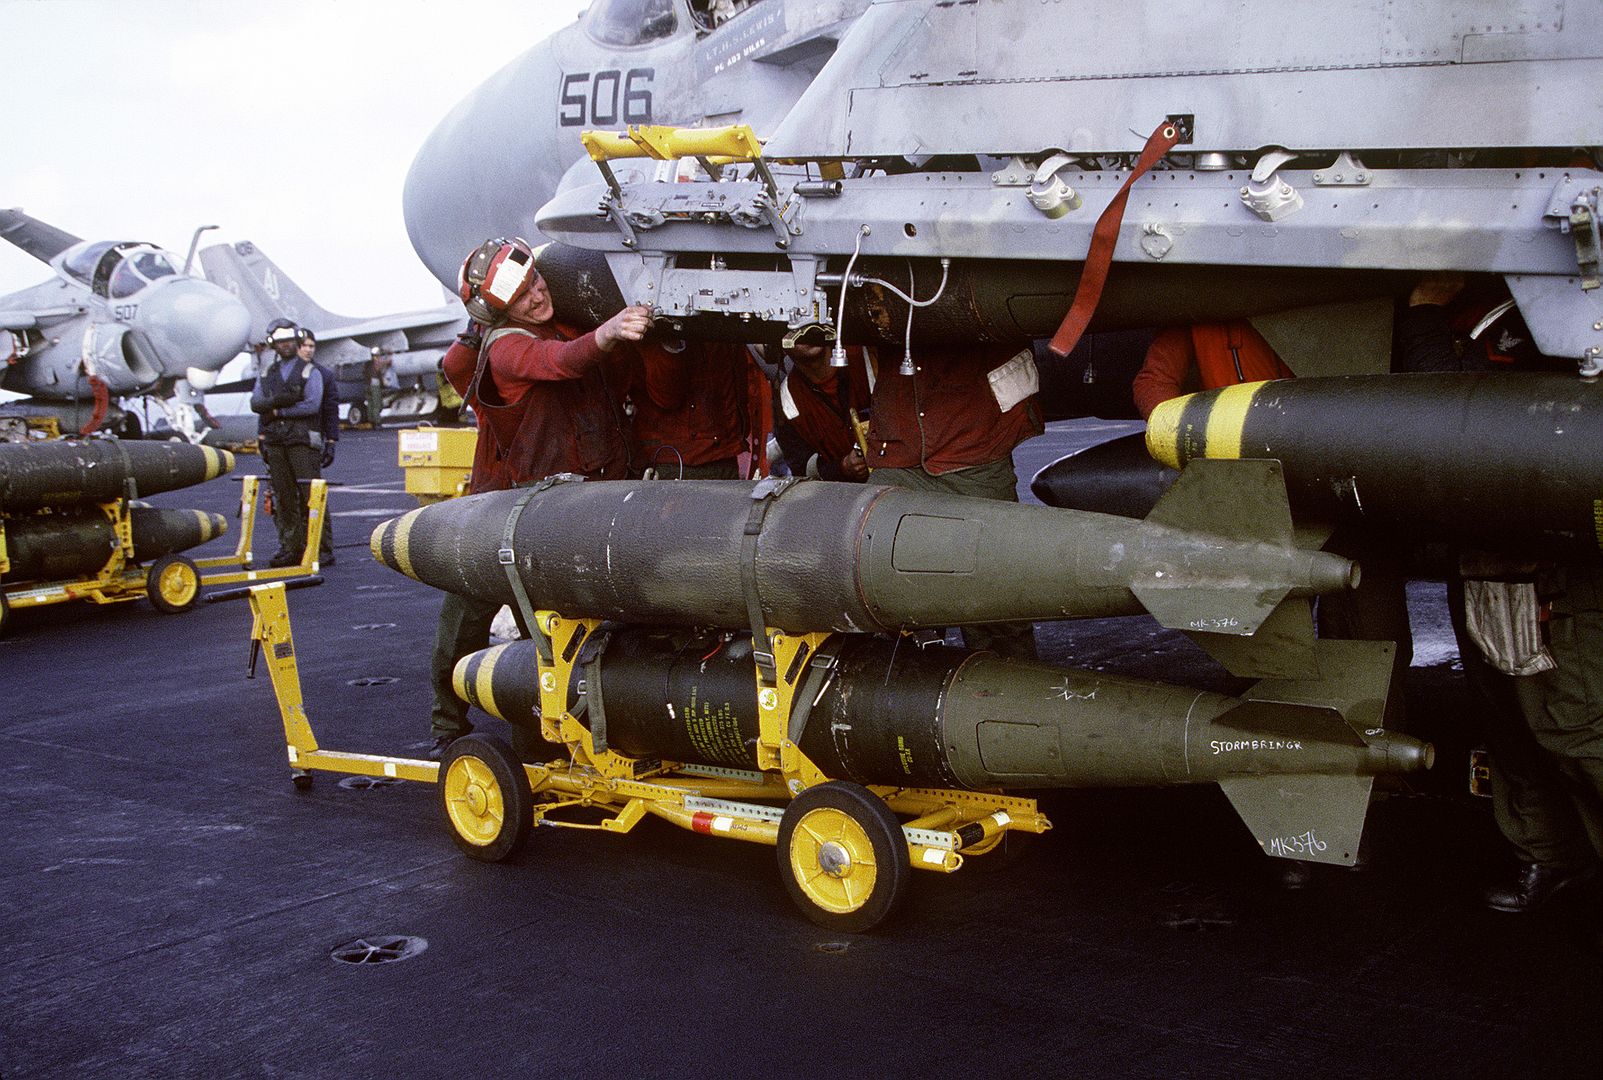 A Front View Of An A 6E Intruder Aircraft Armed With Mark 82 500 Pound Bombs Parked On The Flight Deck Of The Nuclear Powered Aircraft Carrier USS NIMITZ 1